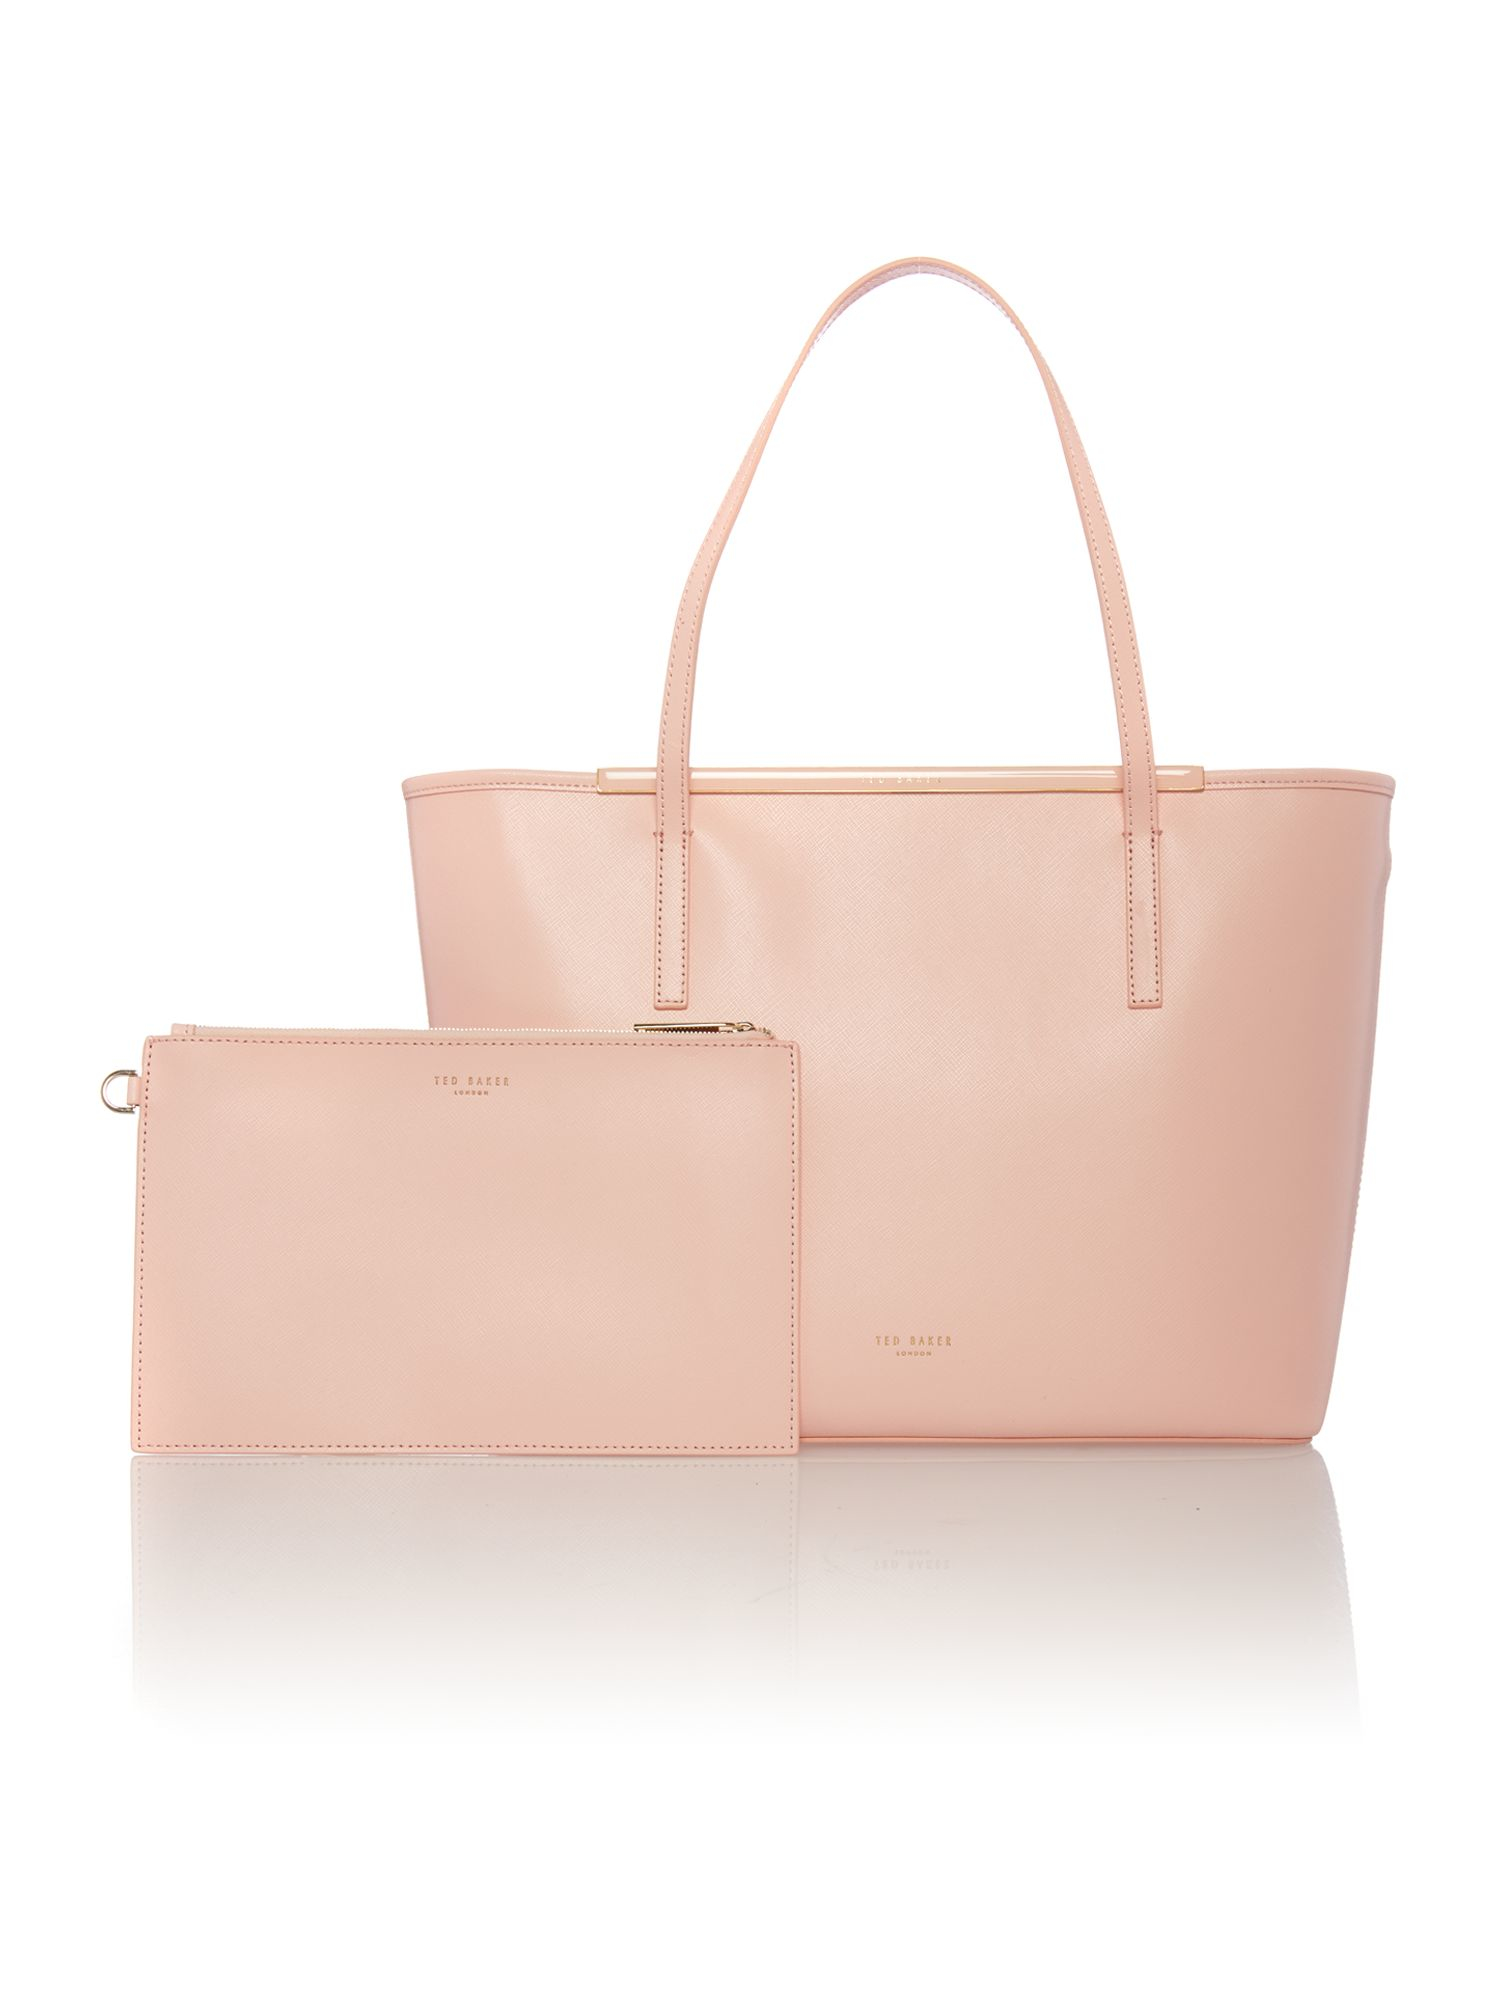 Ted Baker Leather Celiaa Light Pink Saffiano Large Tote Bag - Lyst